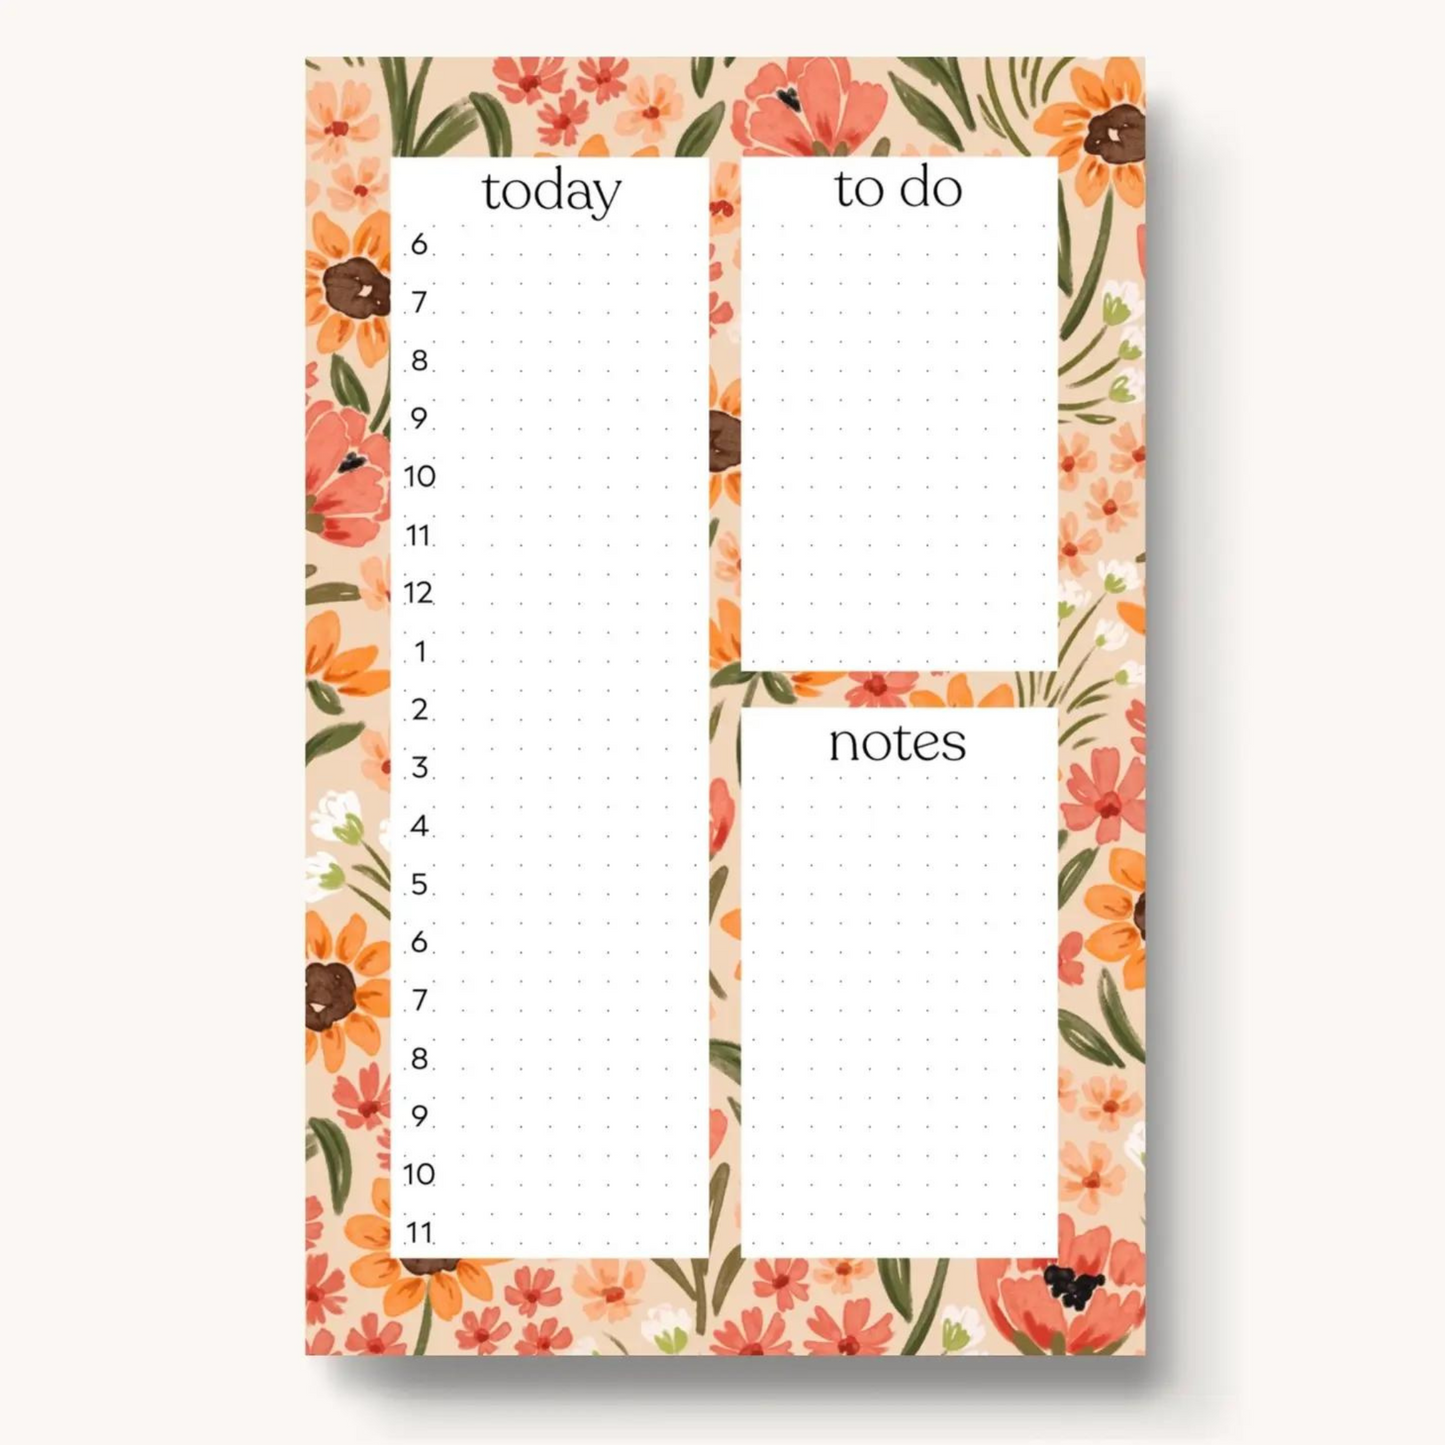 A charming and stylish daily planner note pad designed to keep you organized and inspired.